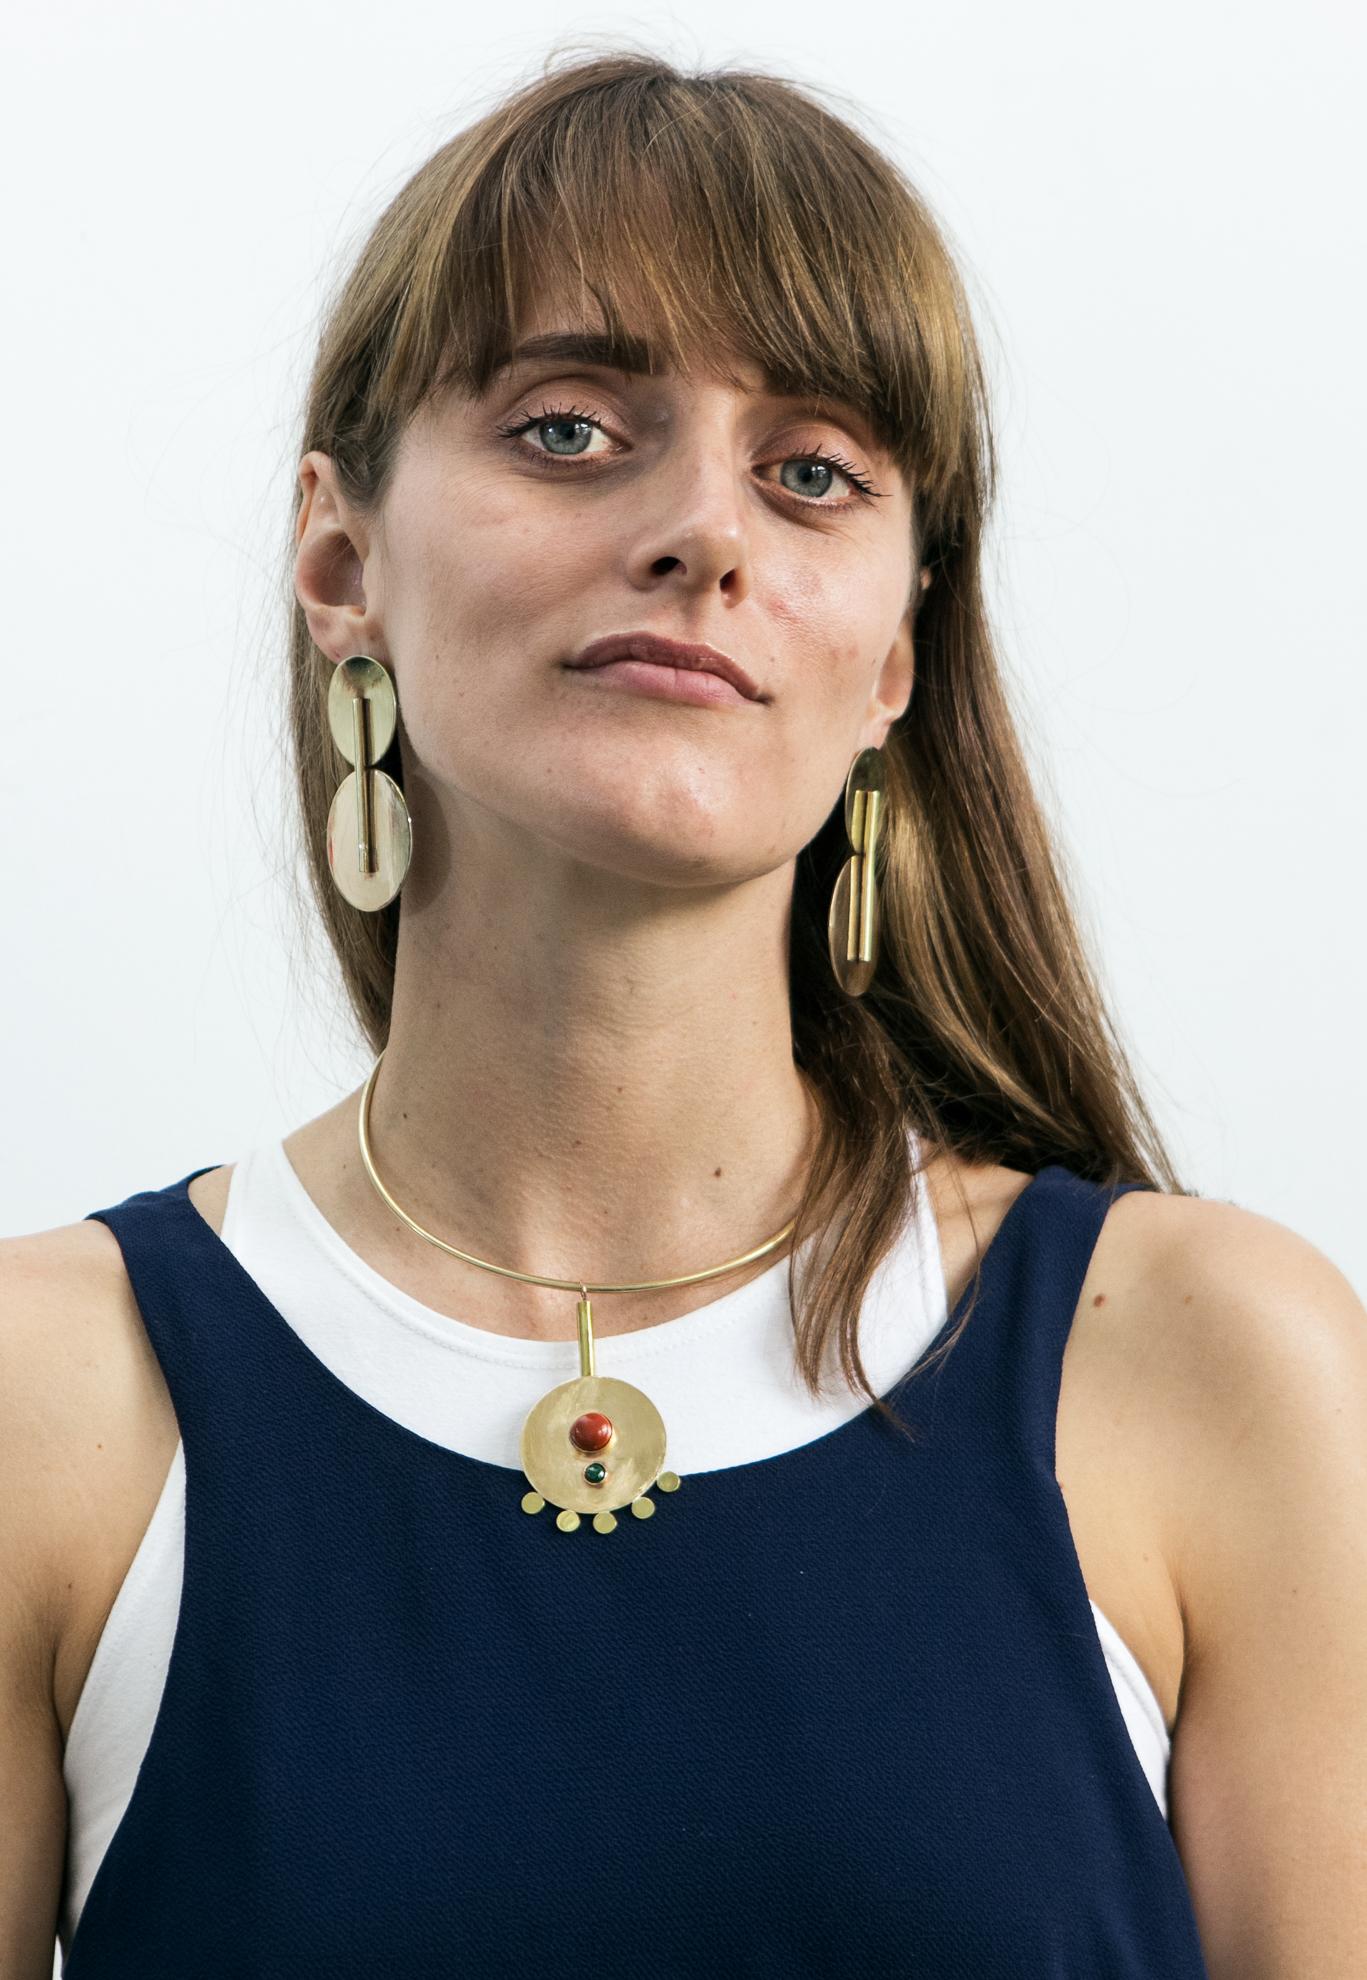 A feminine person with long brown hair and bangs wears large, geometric statement earrings and a bold necklace.